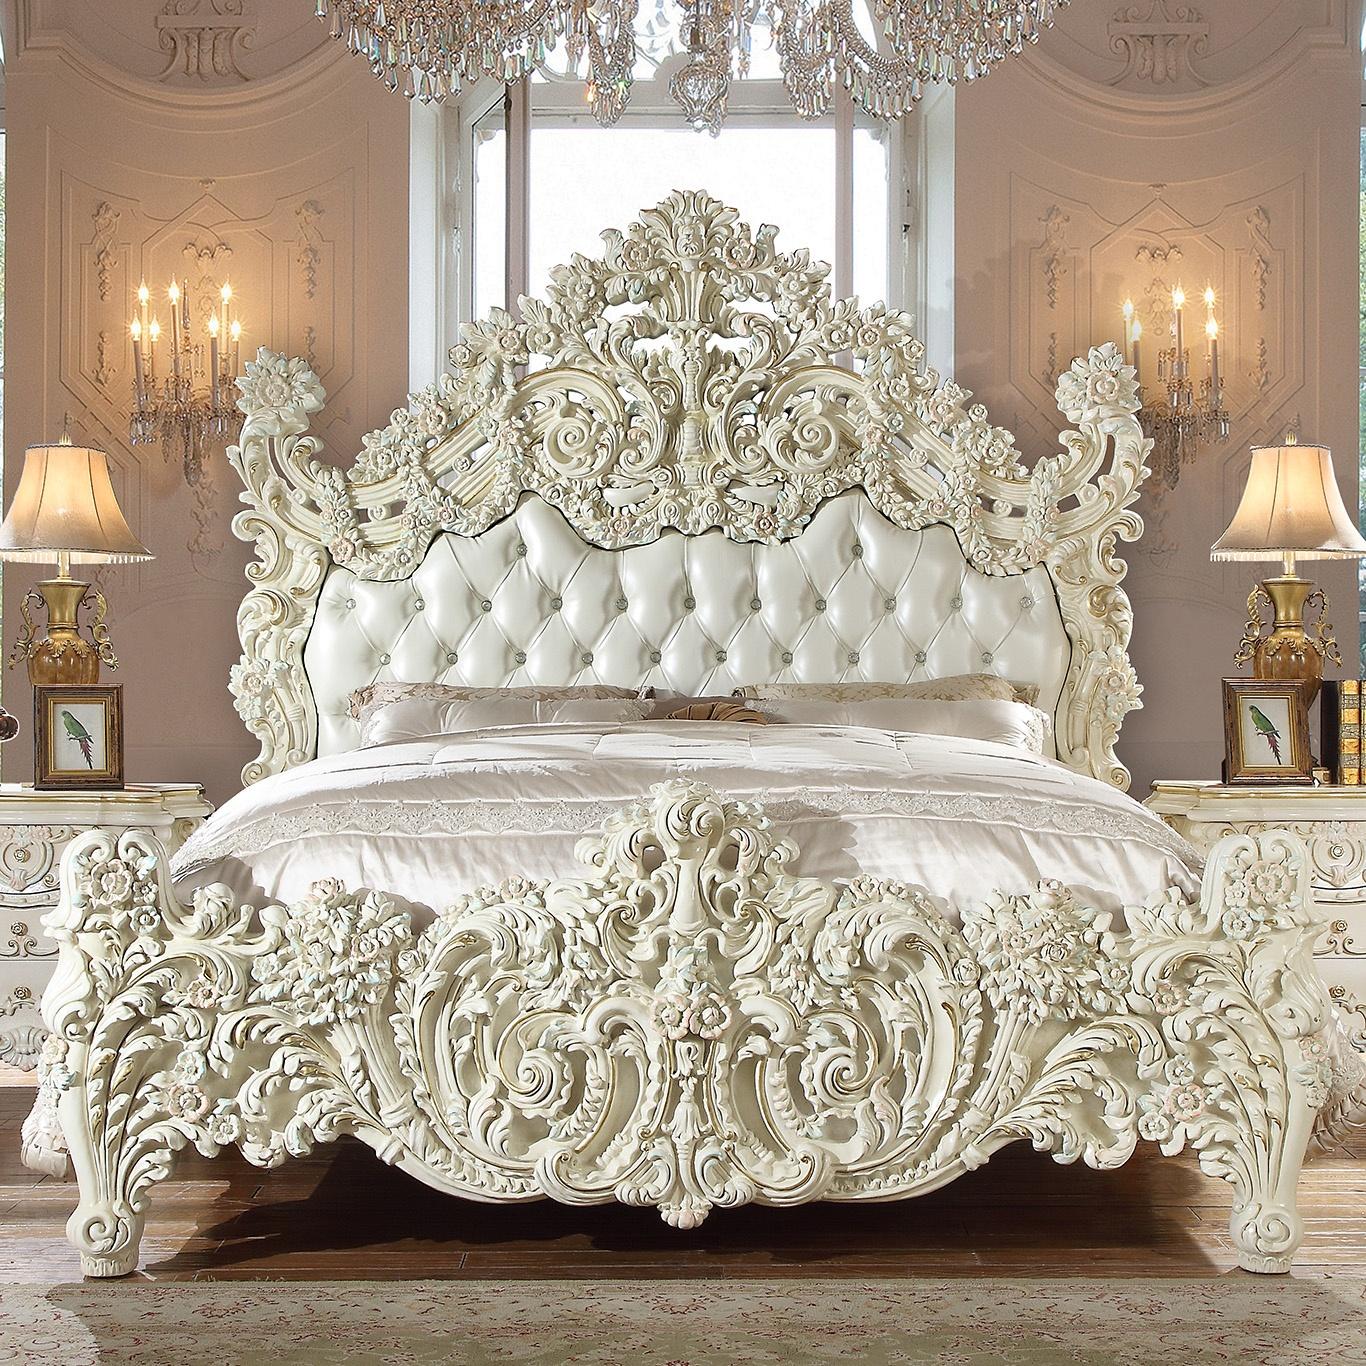 

    
Luxury Glossy White King Bed Carved Wood Homey Design HD-8089
